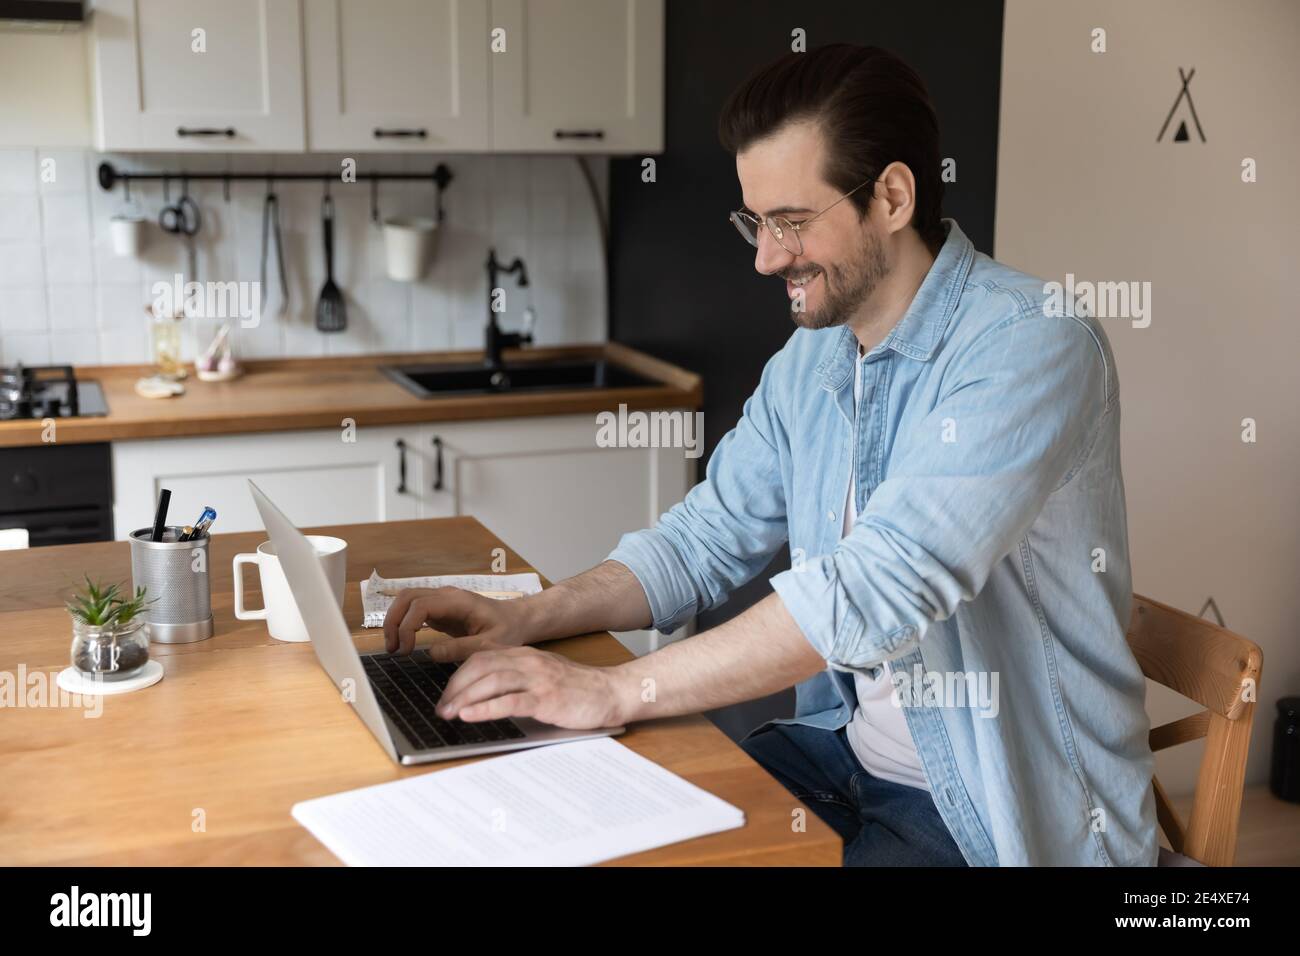 Confident young man student getting professional education via e-learning platform Stock Photo